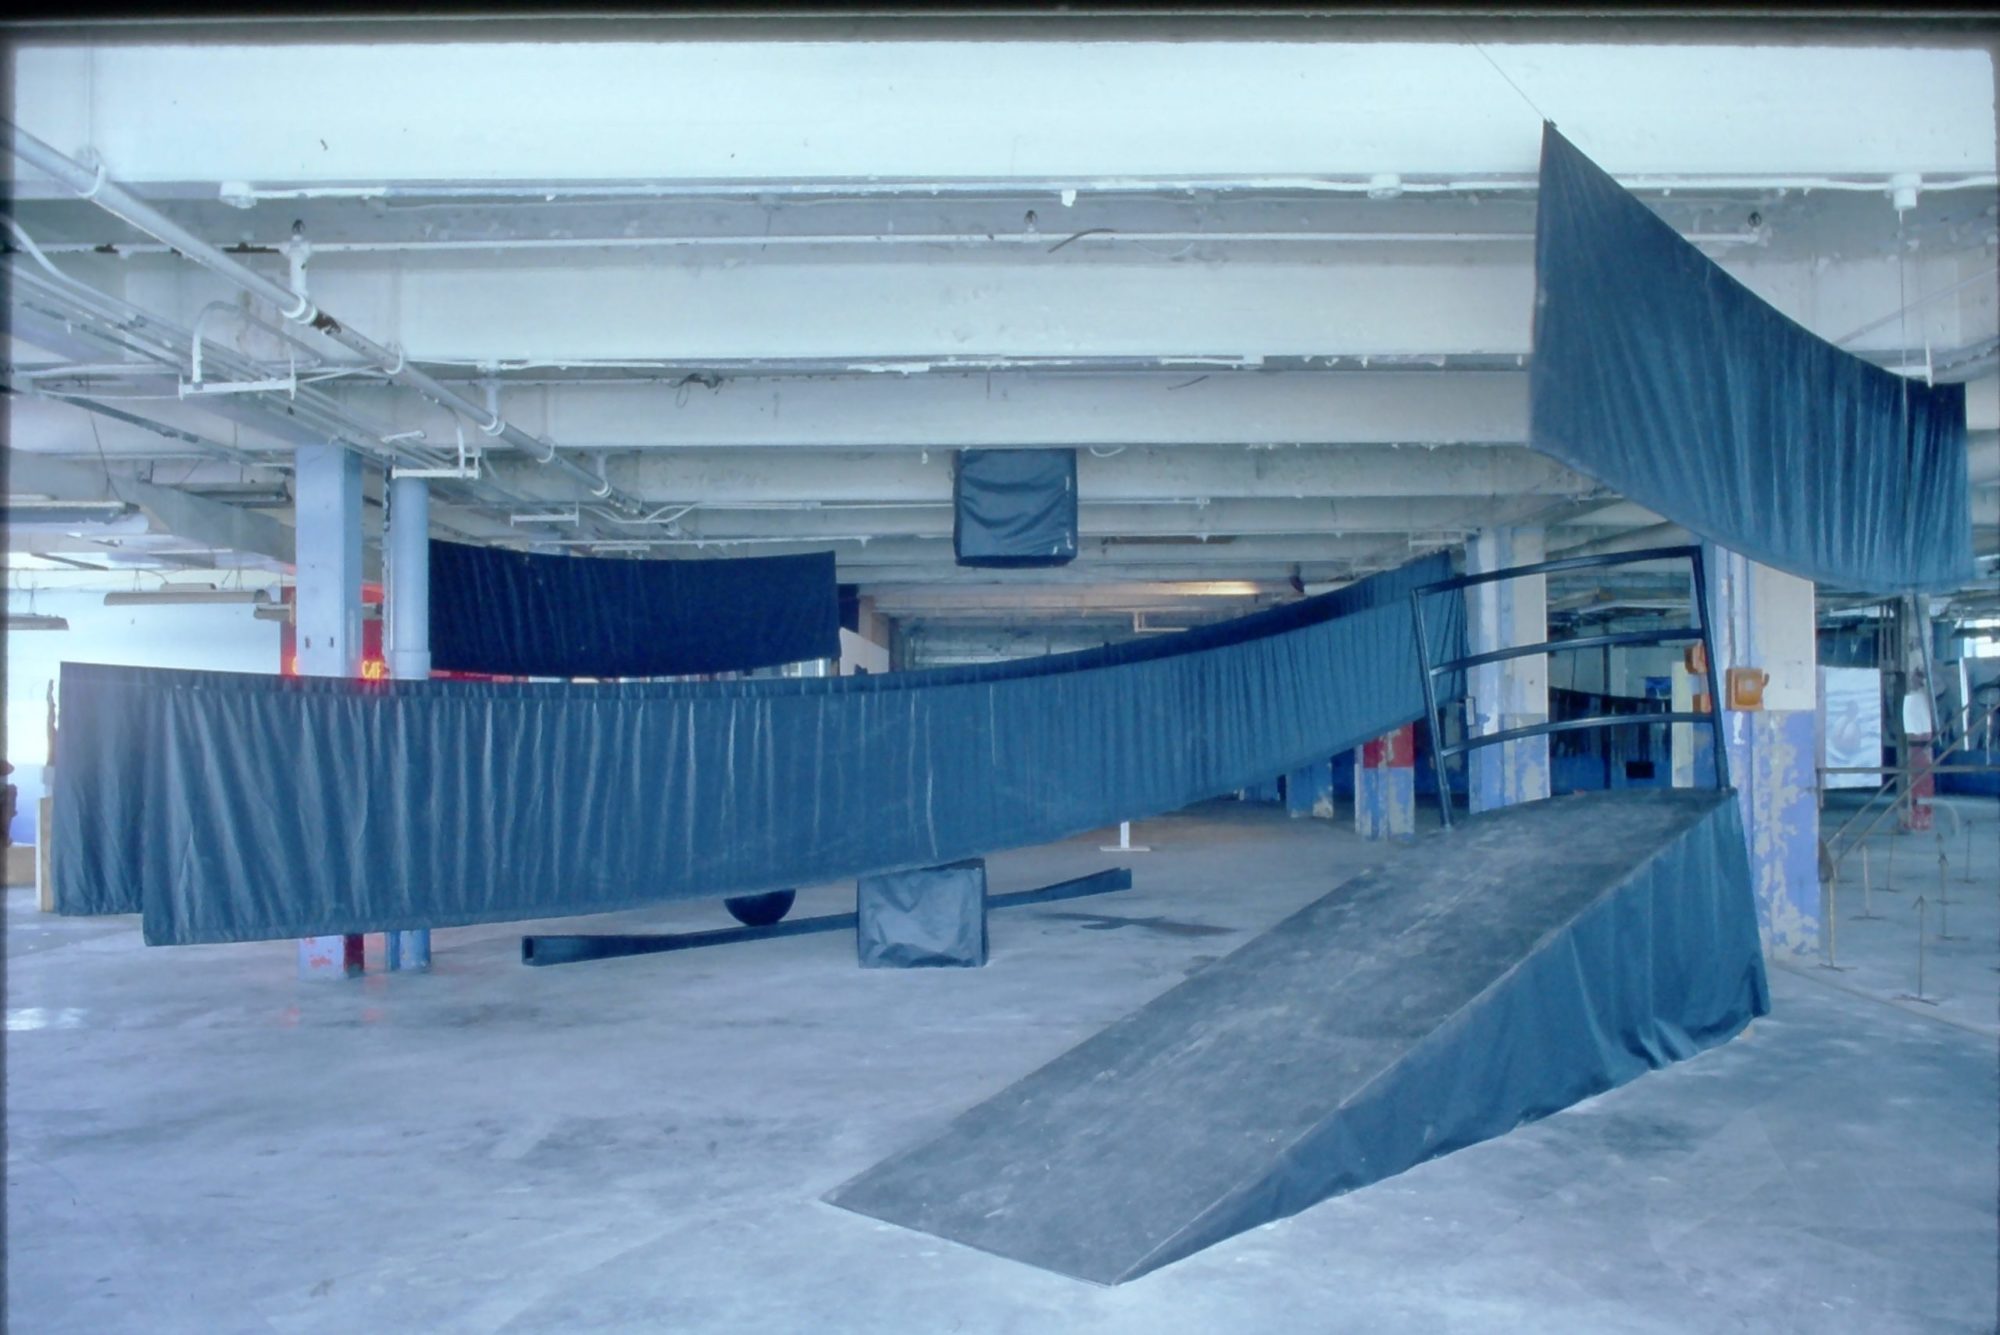 A photograph of an art installation with suspended black pieces of cloth and a black ramp.